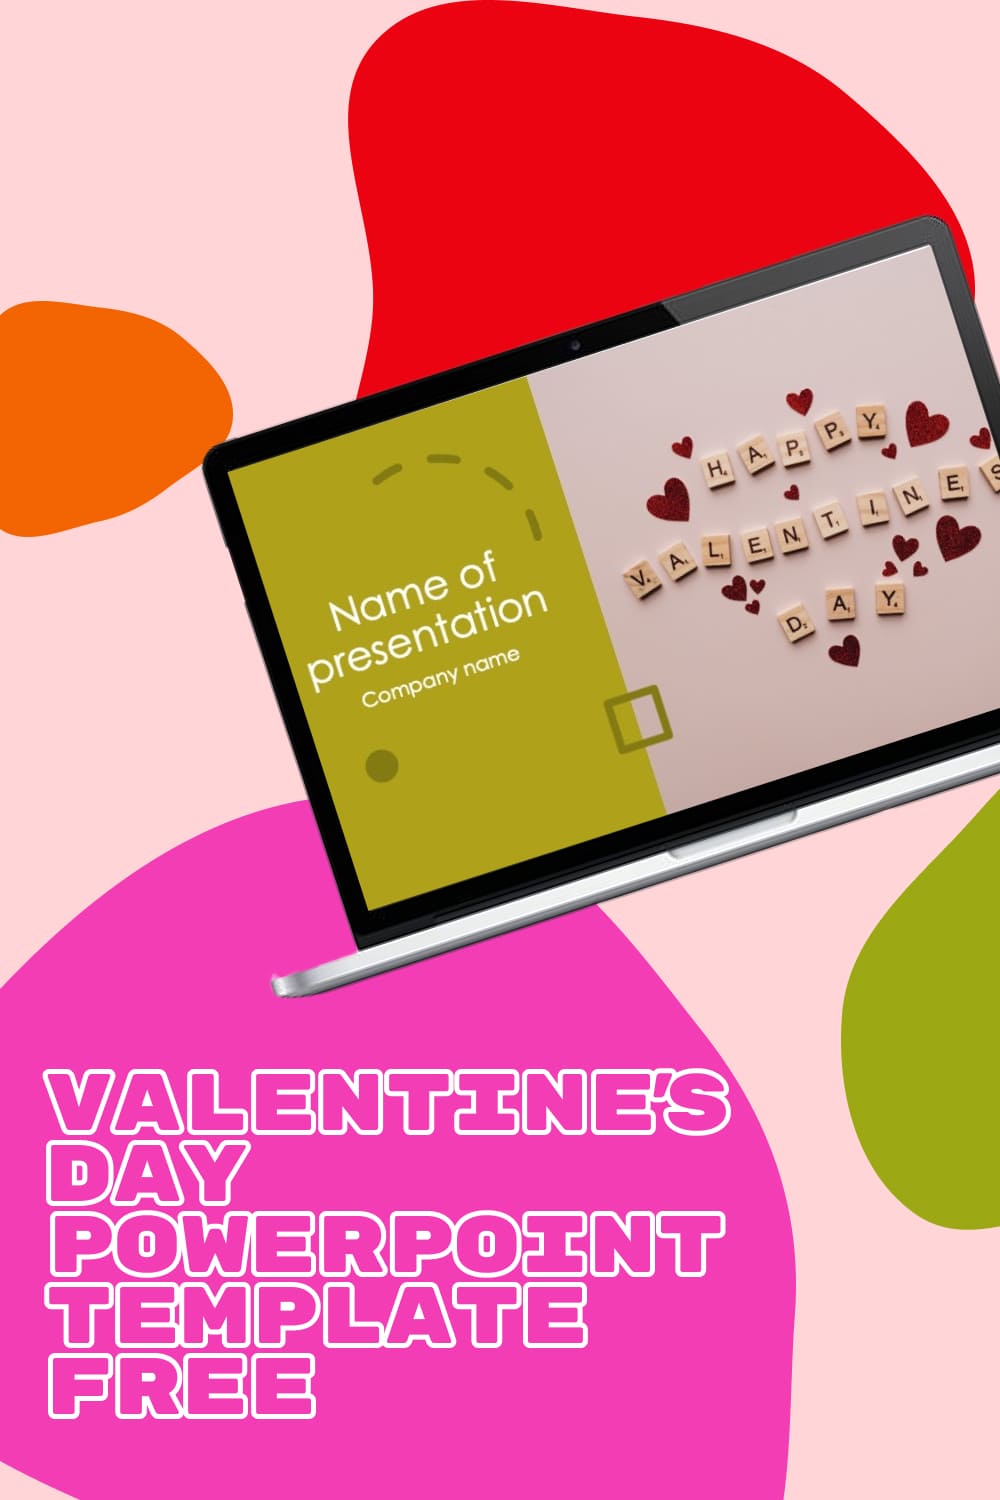 Pinterest of Valentines Day Powerpoint Template.